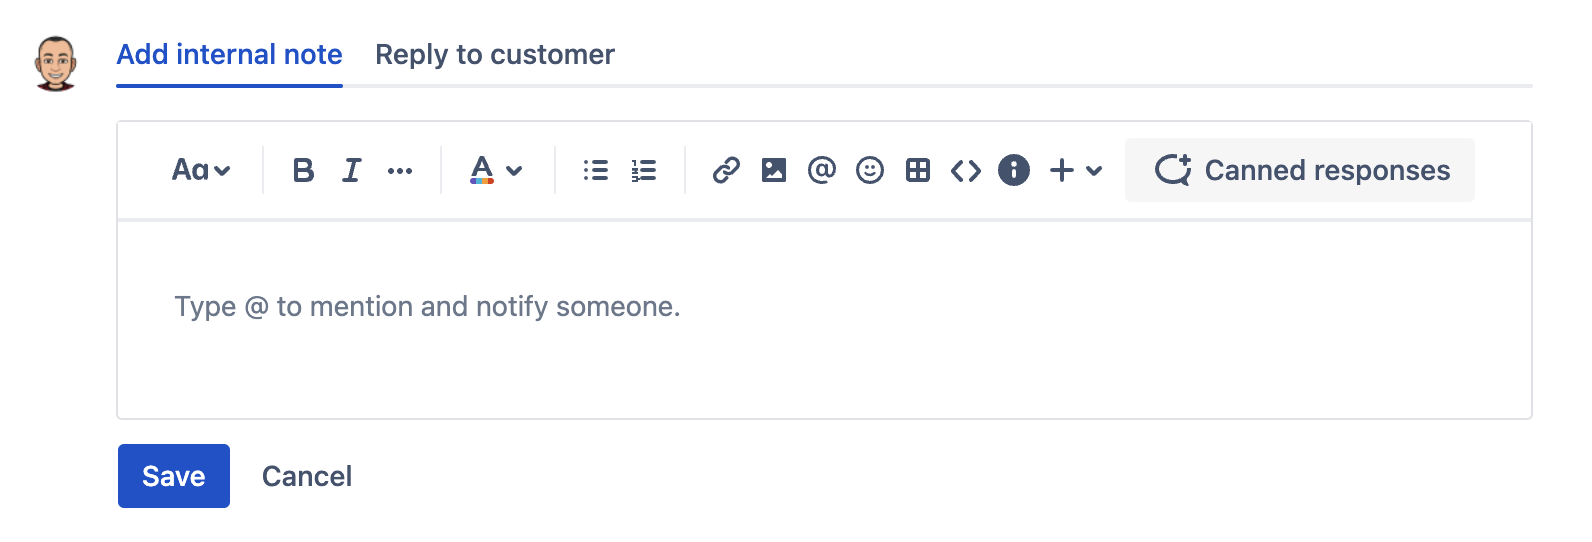 Use internal notes in Jira to communicate better